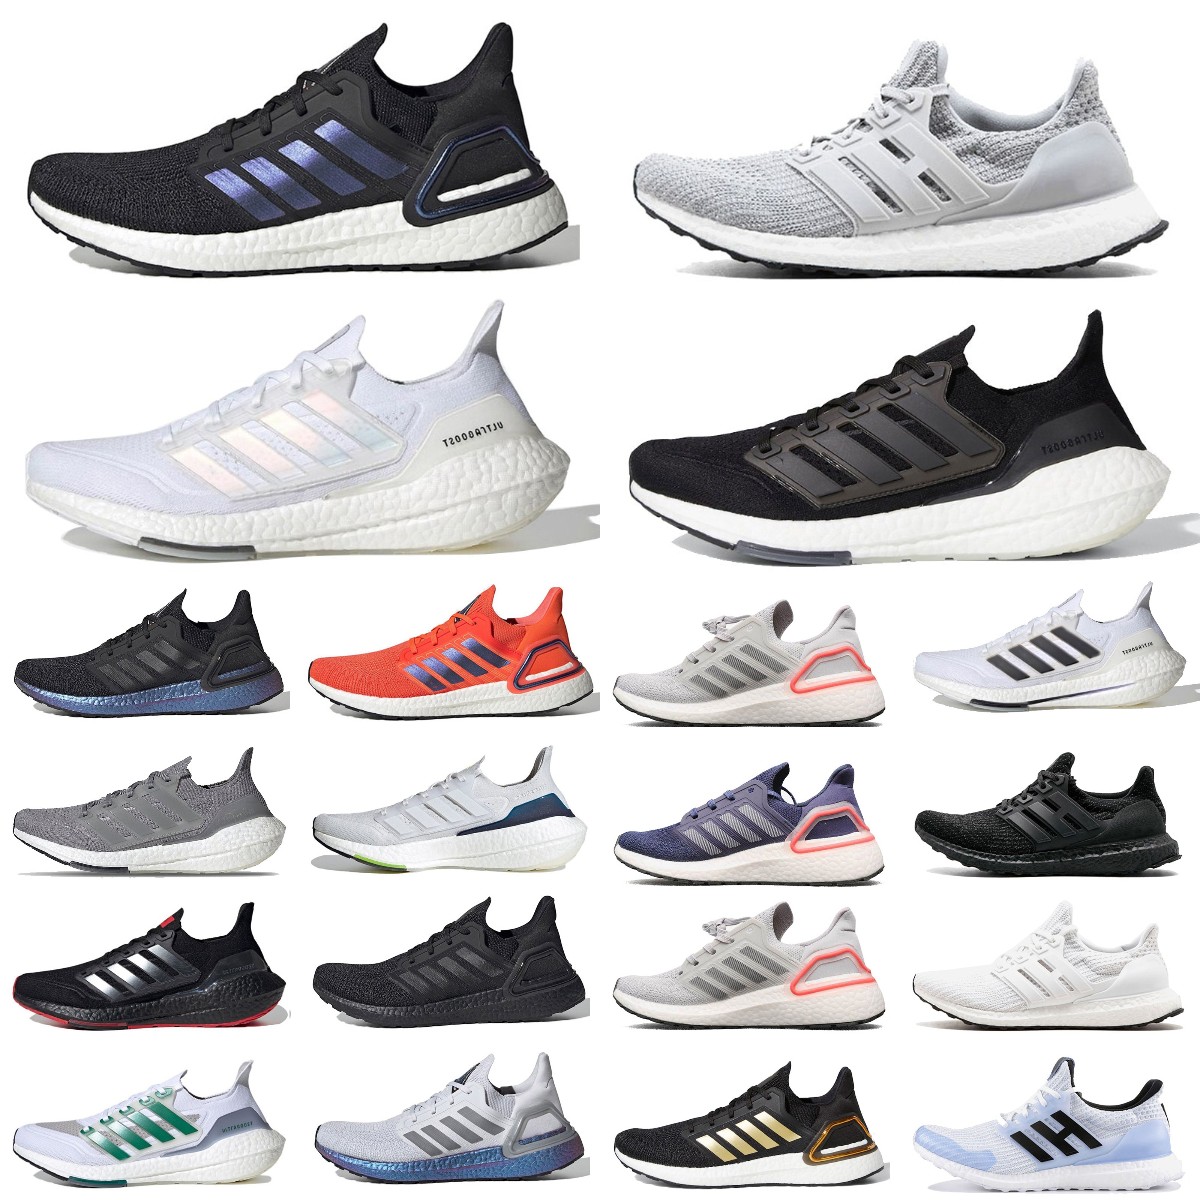 

NEW Ultraboosts 20 21 UB 4.0 6.0 casual shoes Mens Womens Ultra Se Triple White Black Solar Grey Orange Gold Metallic Run Chaussures running shoe Trainers Sneakers 36-45, Box